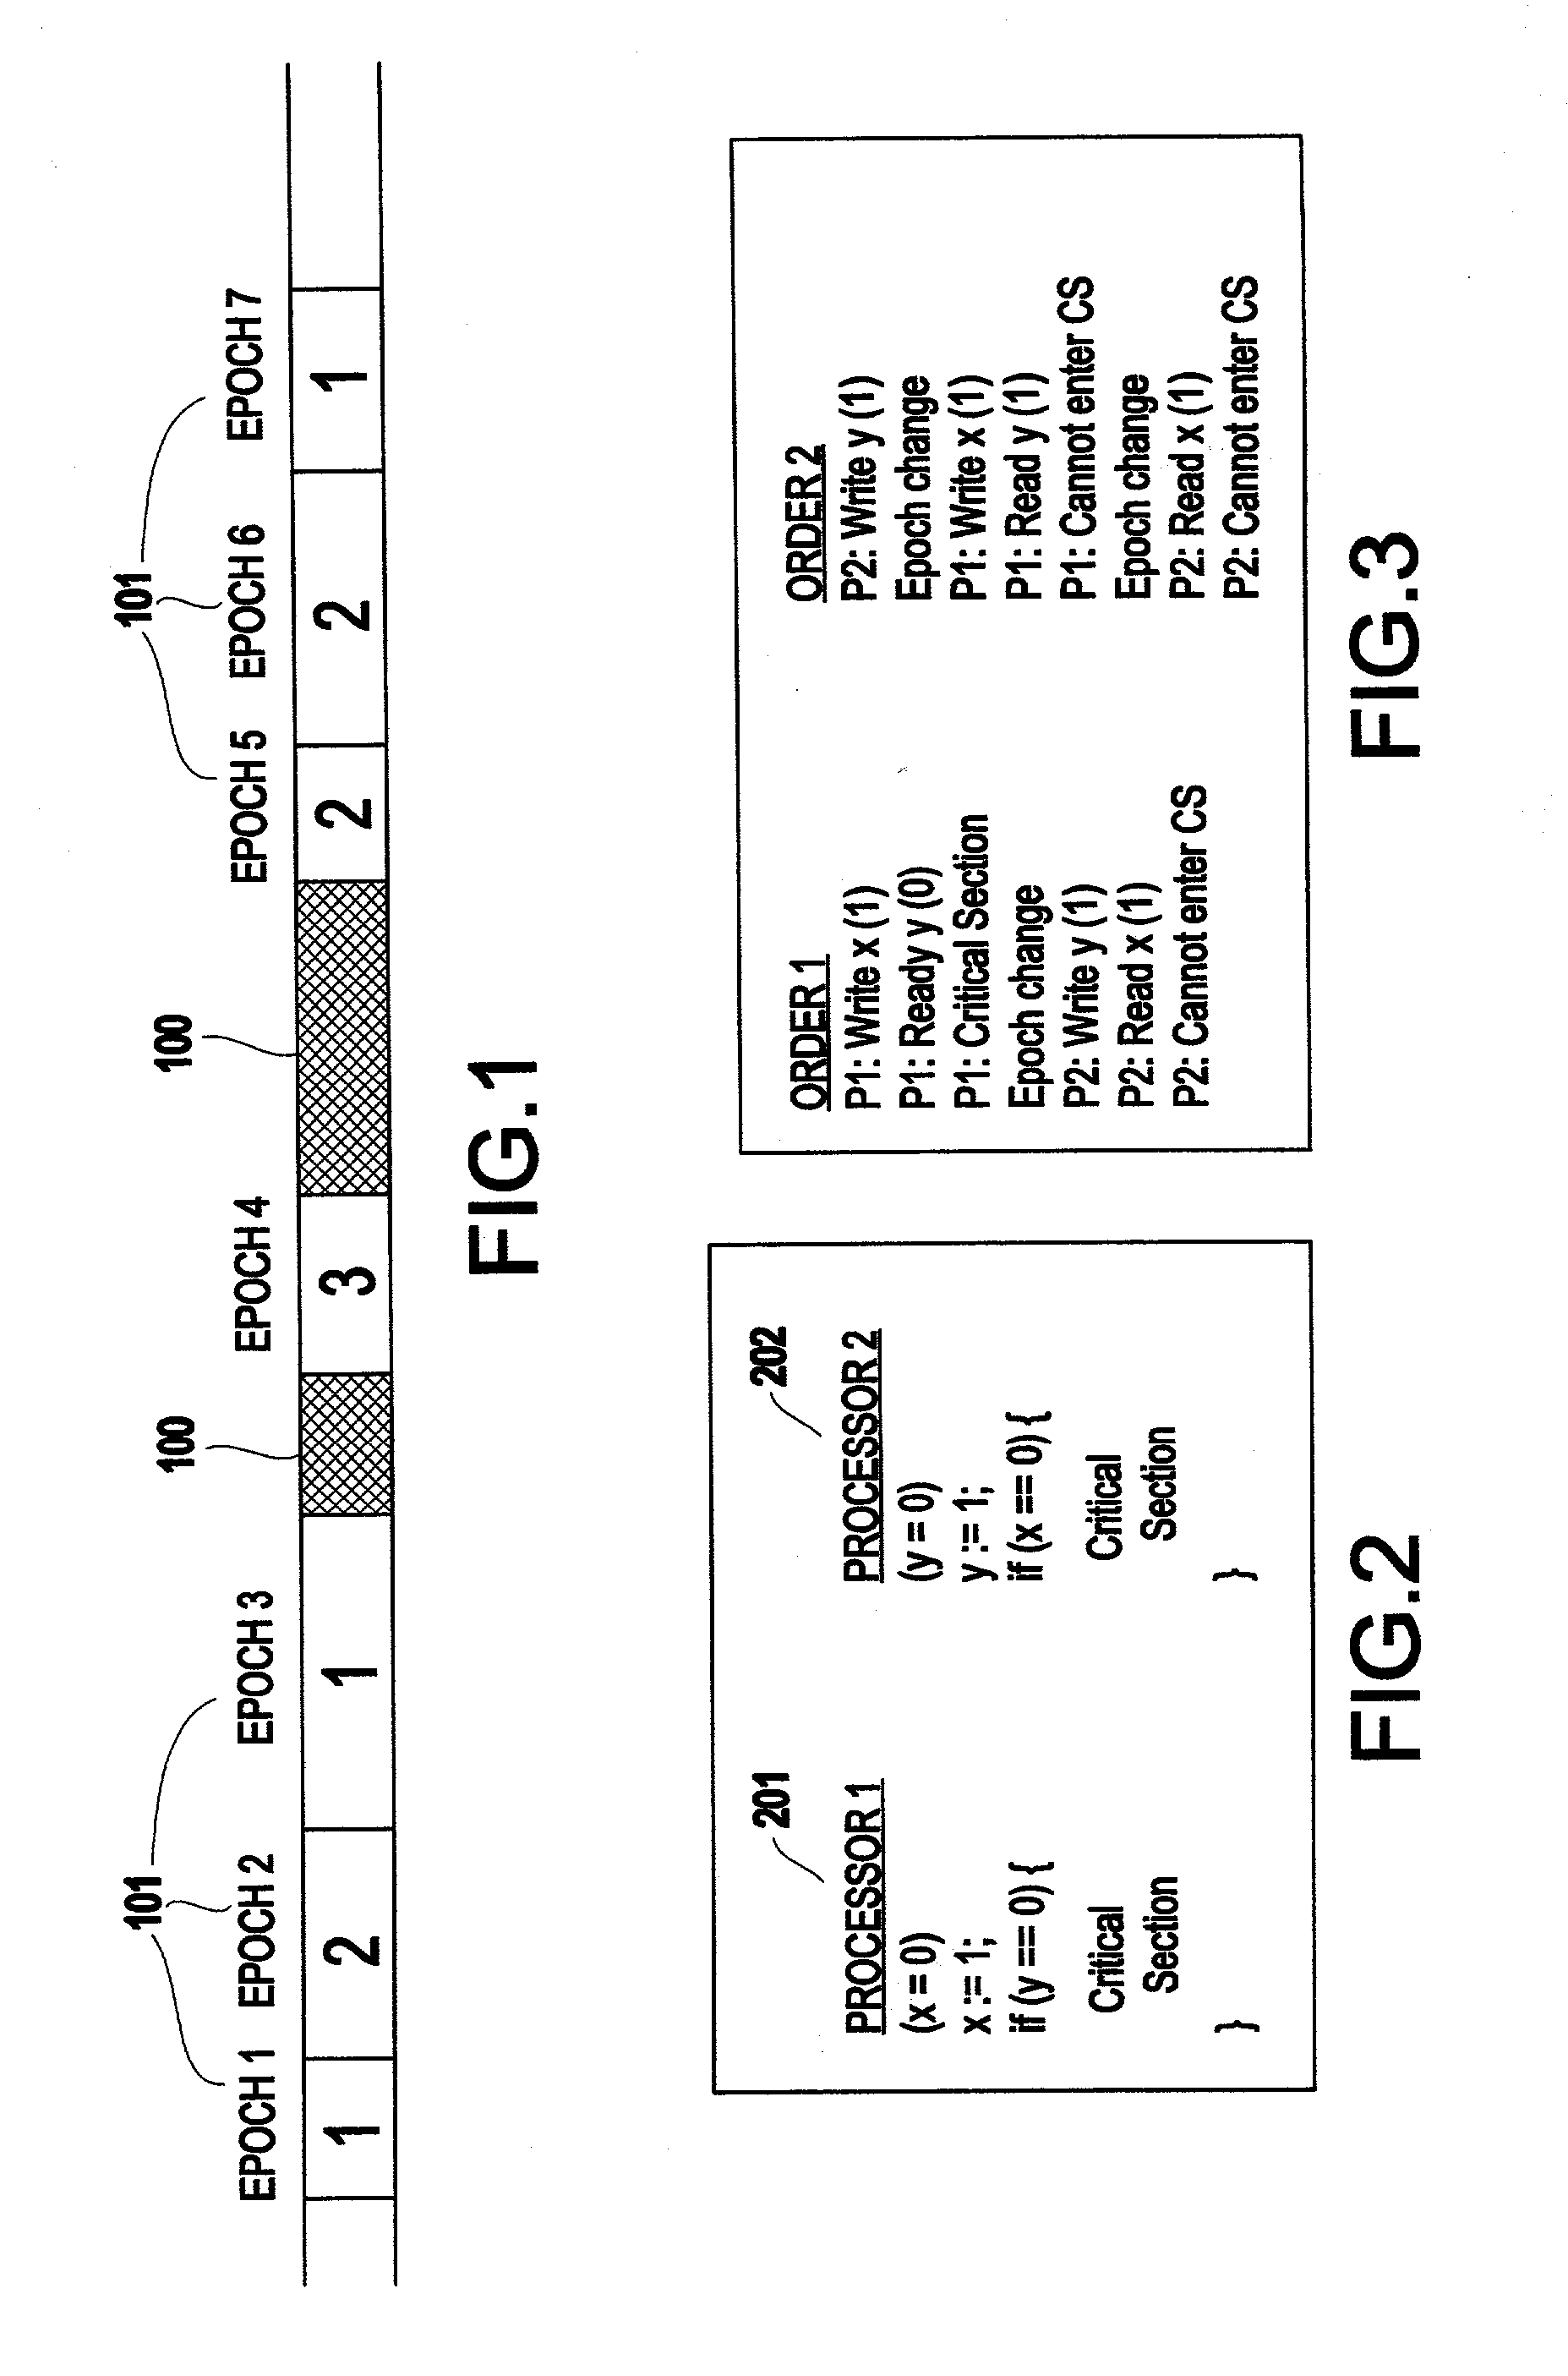 Method and system for efficient emulation of multiprocessor memory consistency